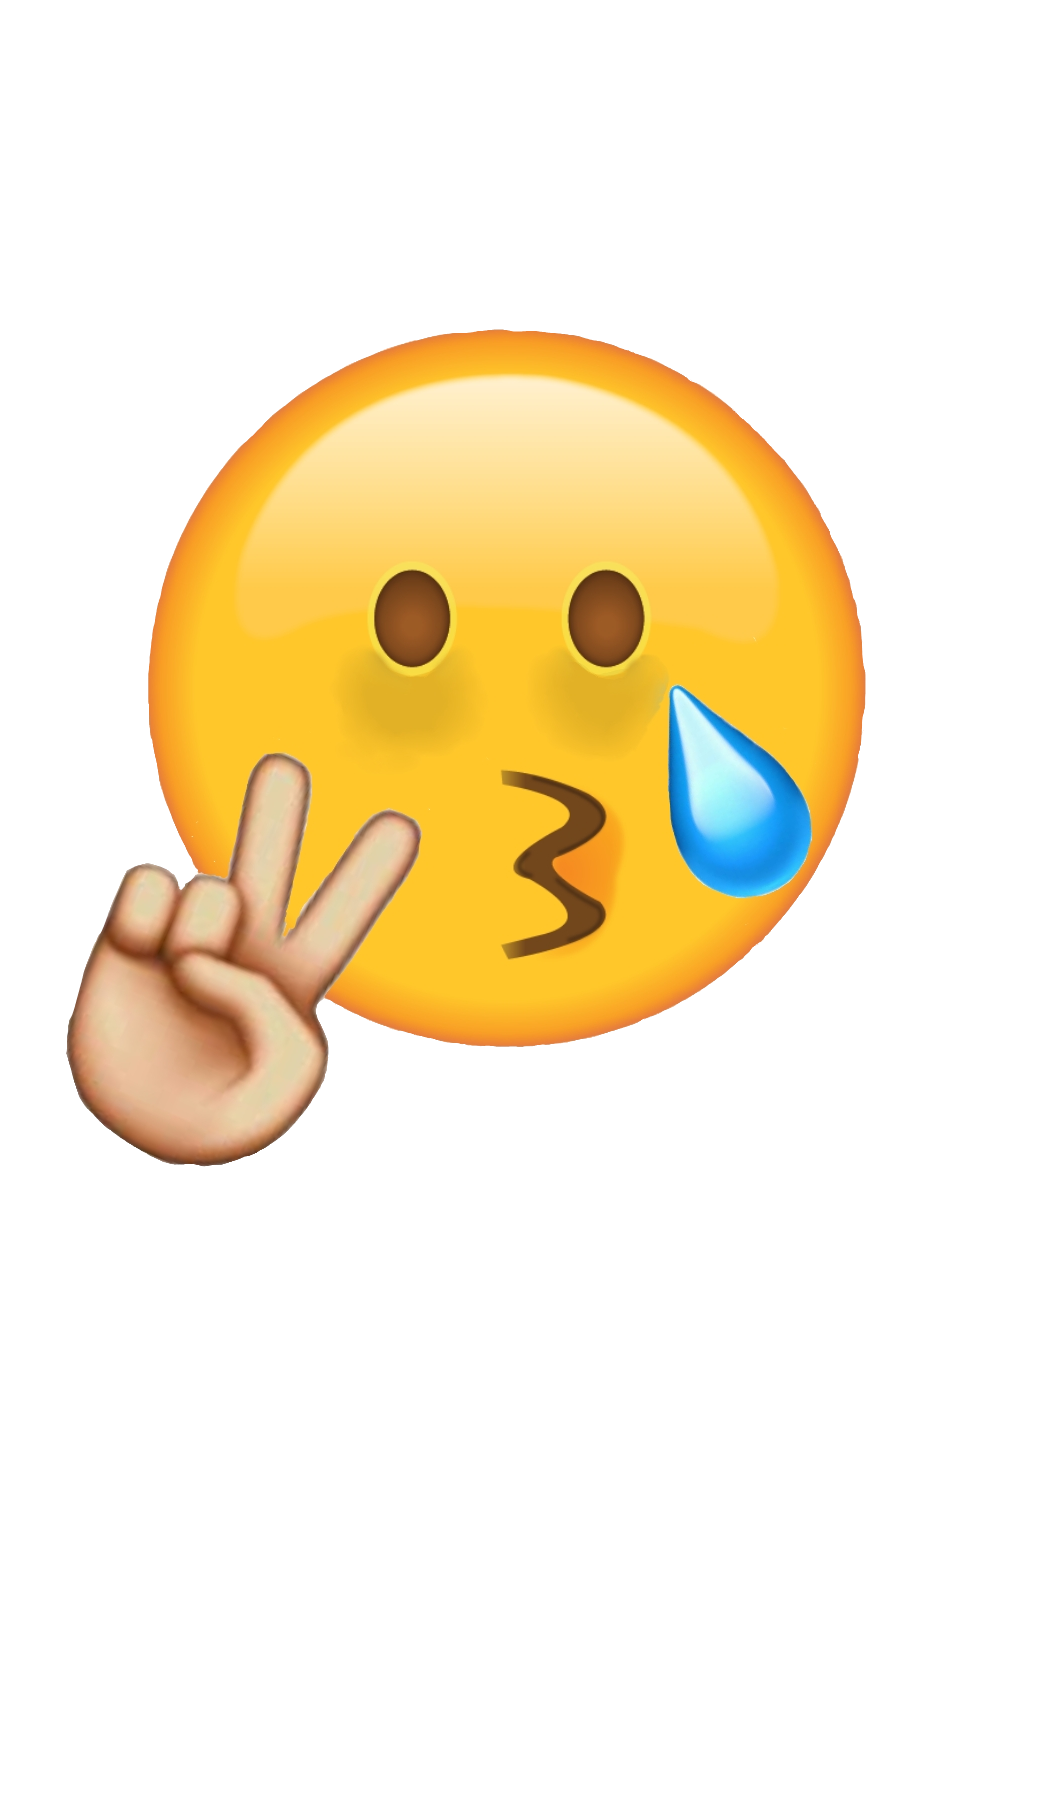 A Yellow Emoji With A Peace Sign And A Hand